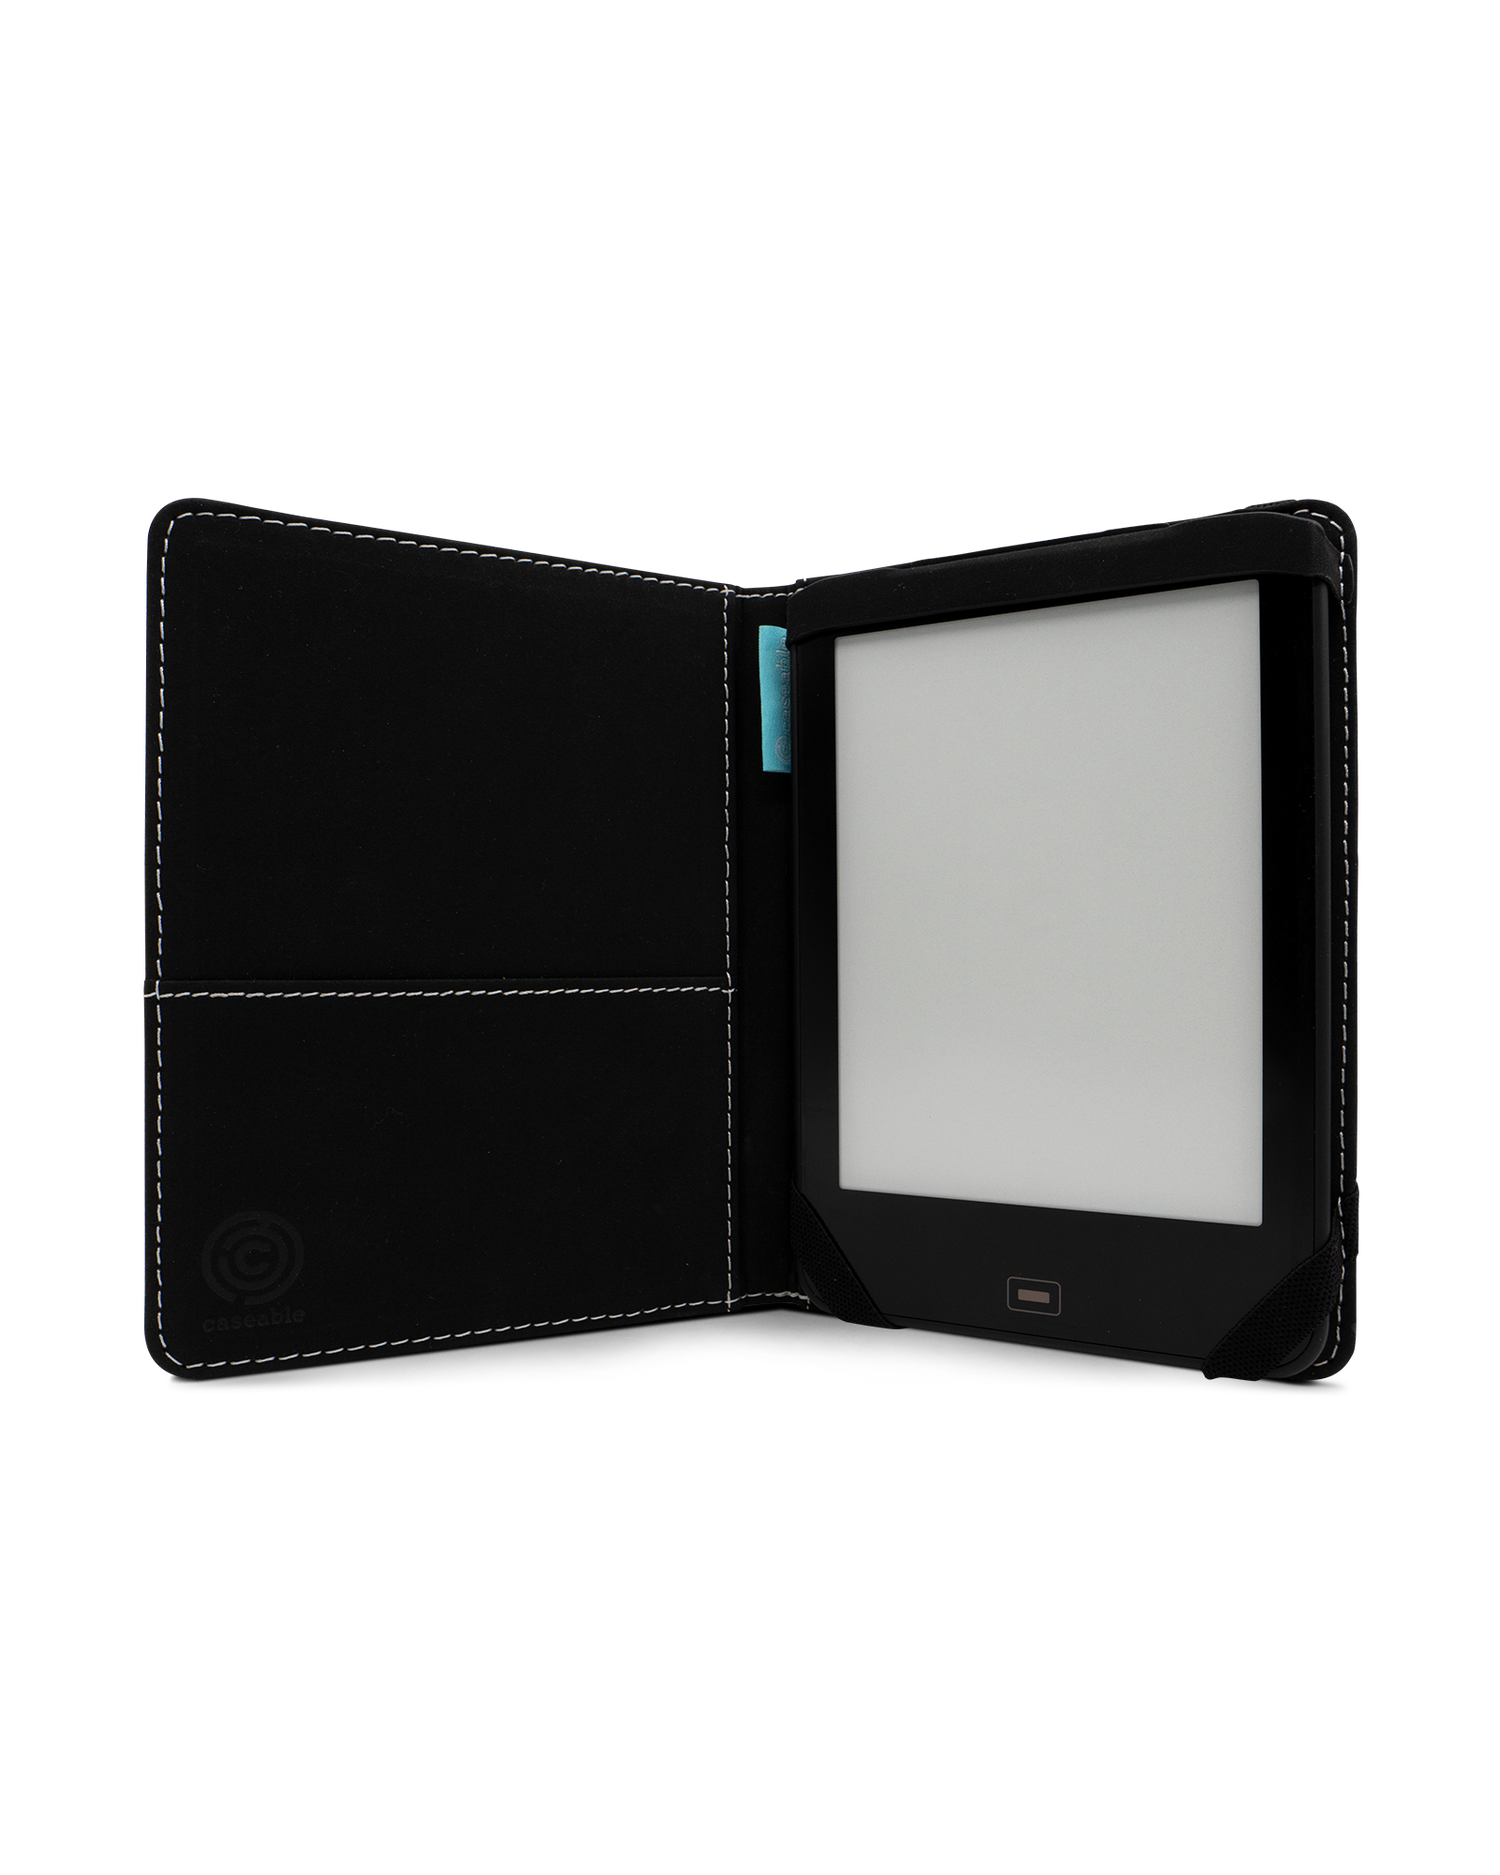 Spec Ops Dark eReader Case for tolino vision 1 to 4 HD: Opened interior view